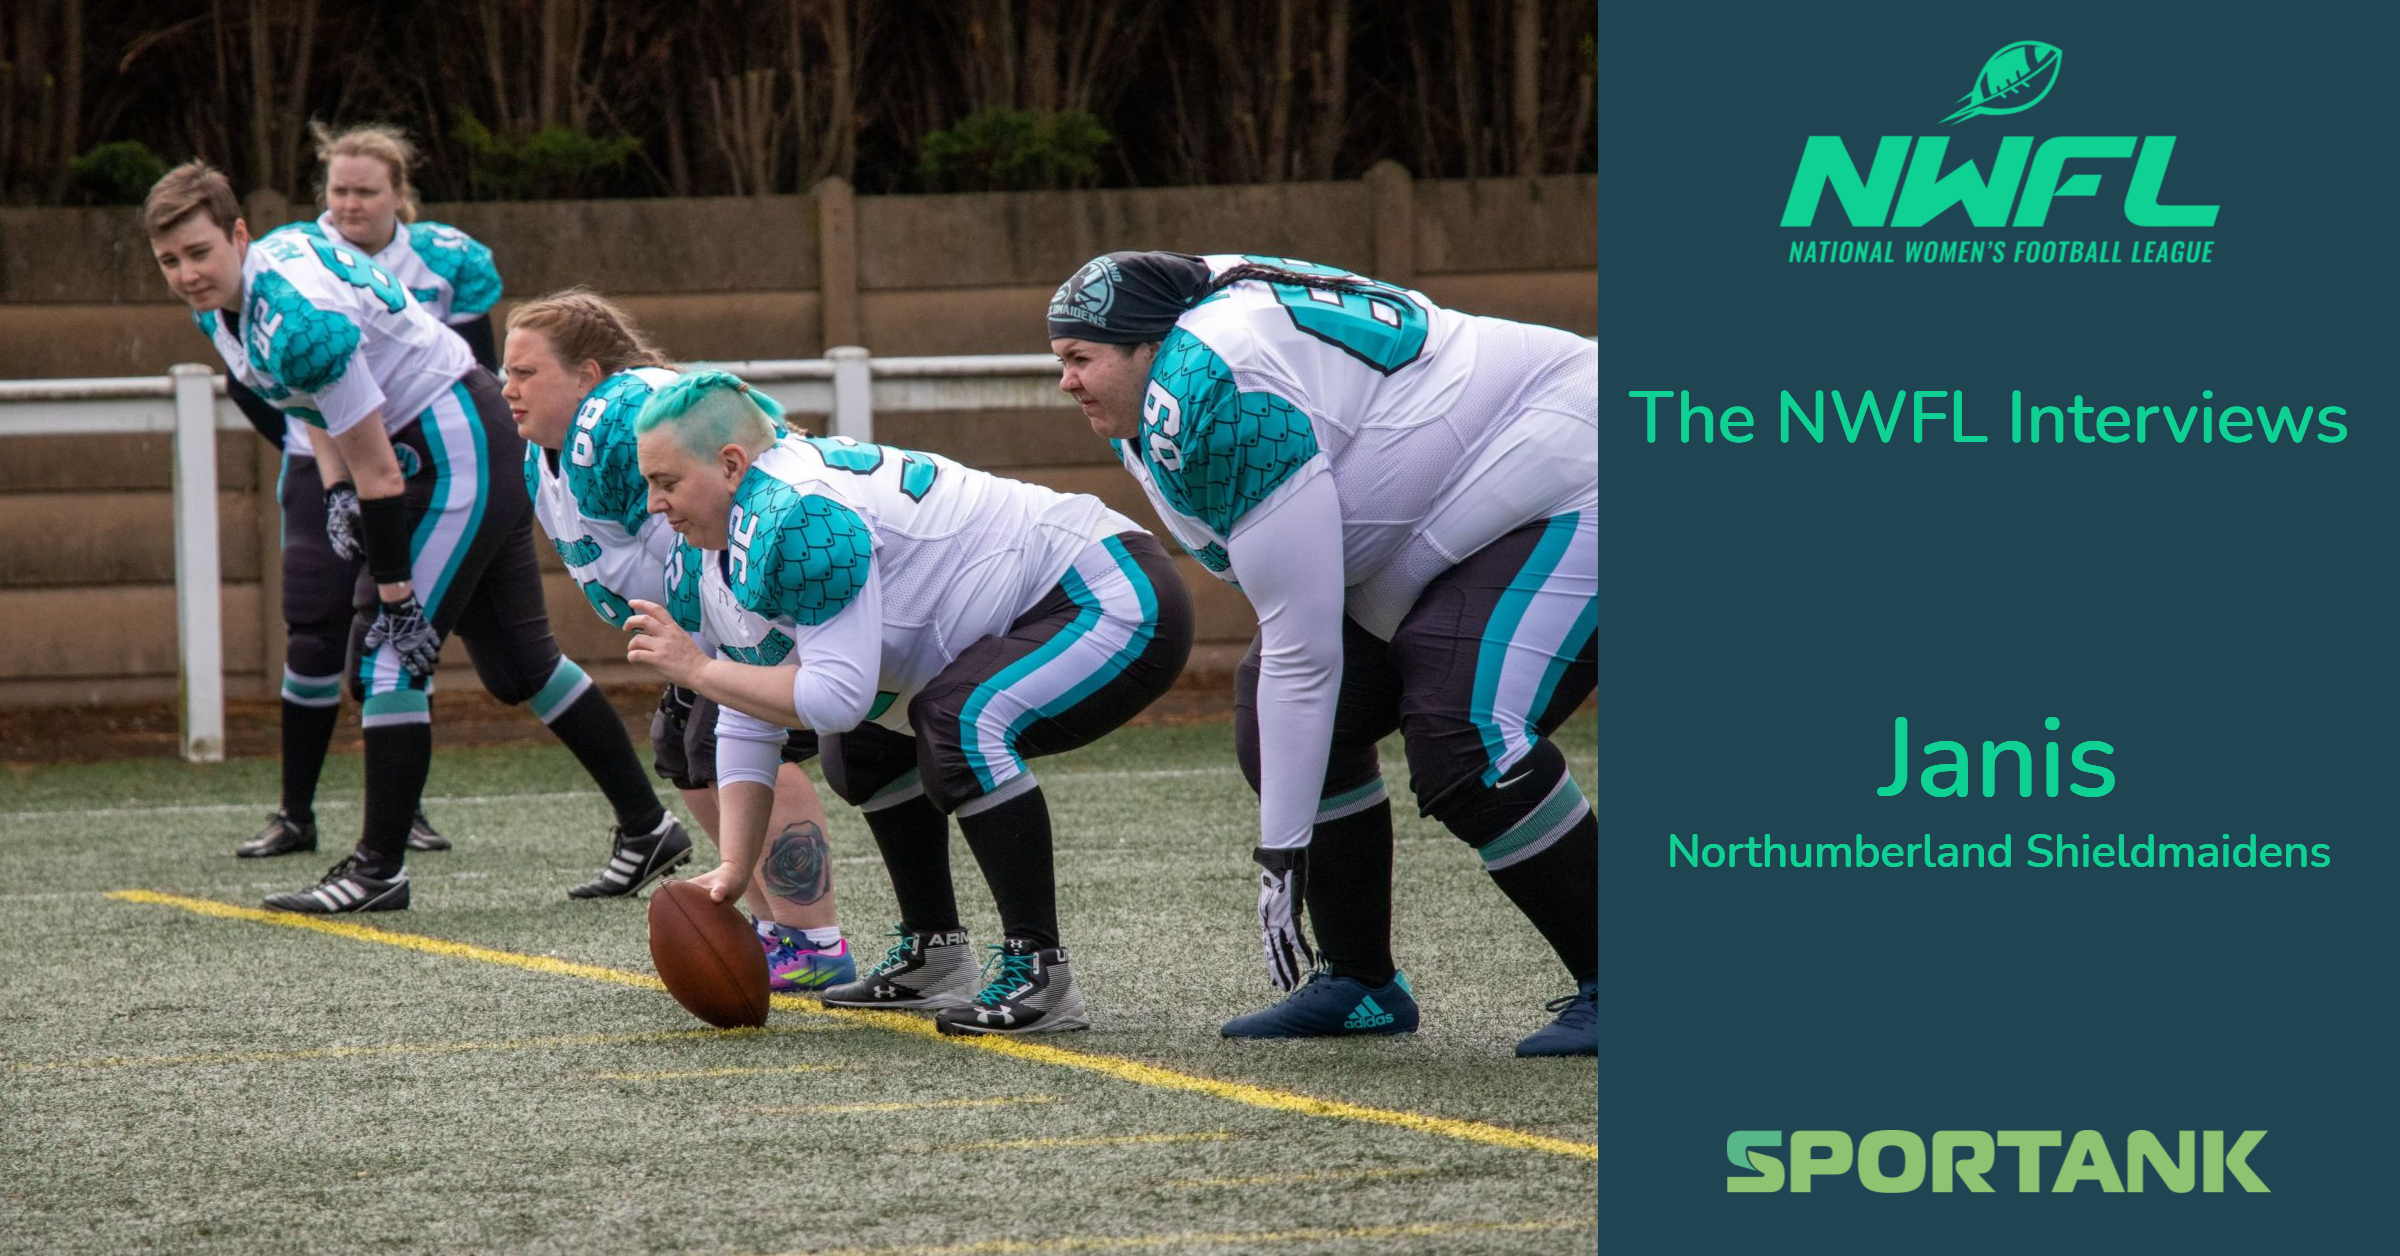 The NWFL Interviews: Janis of the Northumberland Shieldmaidens